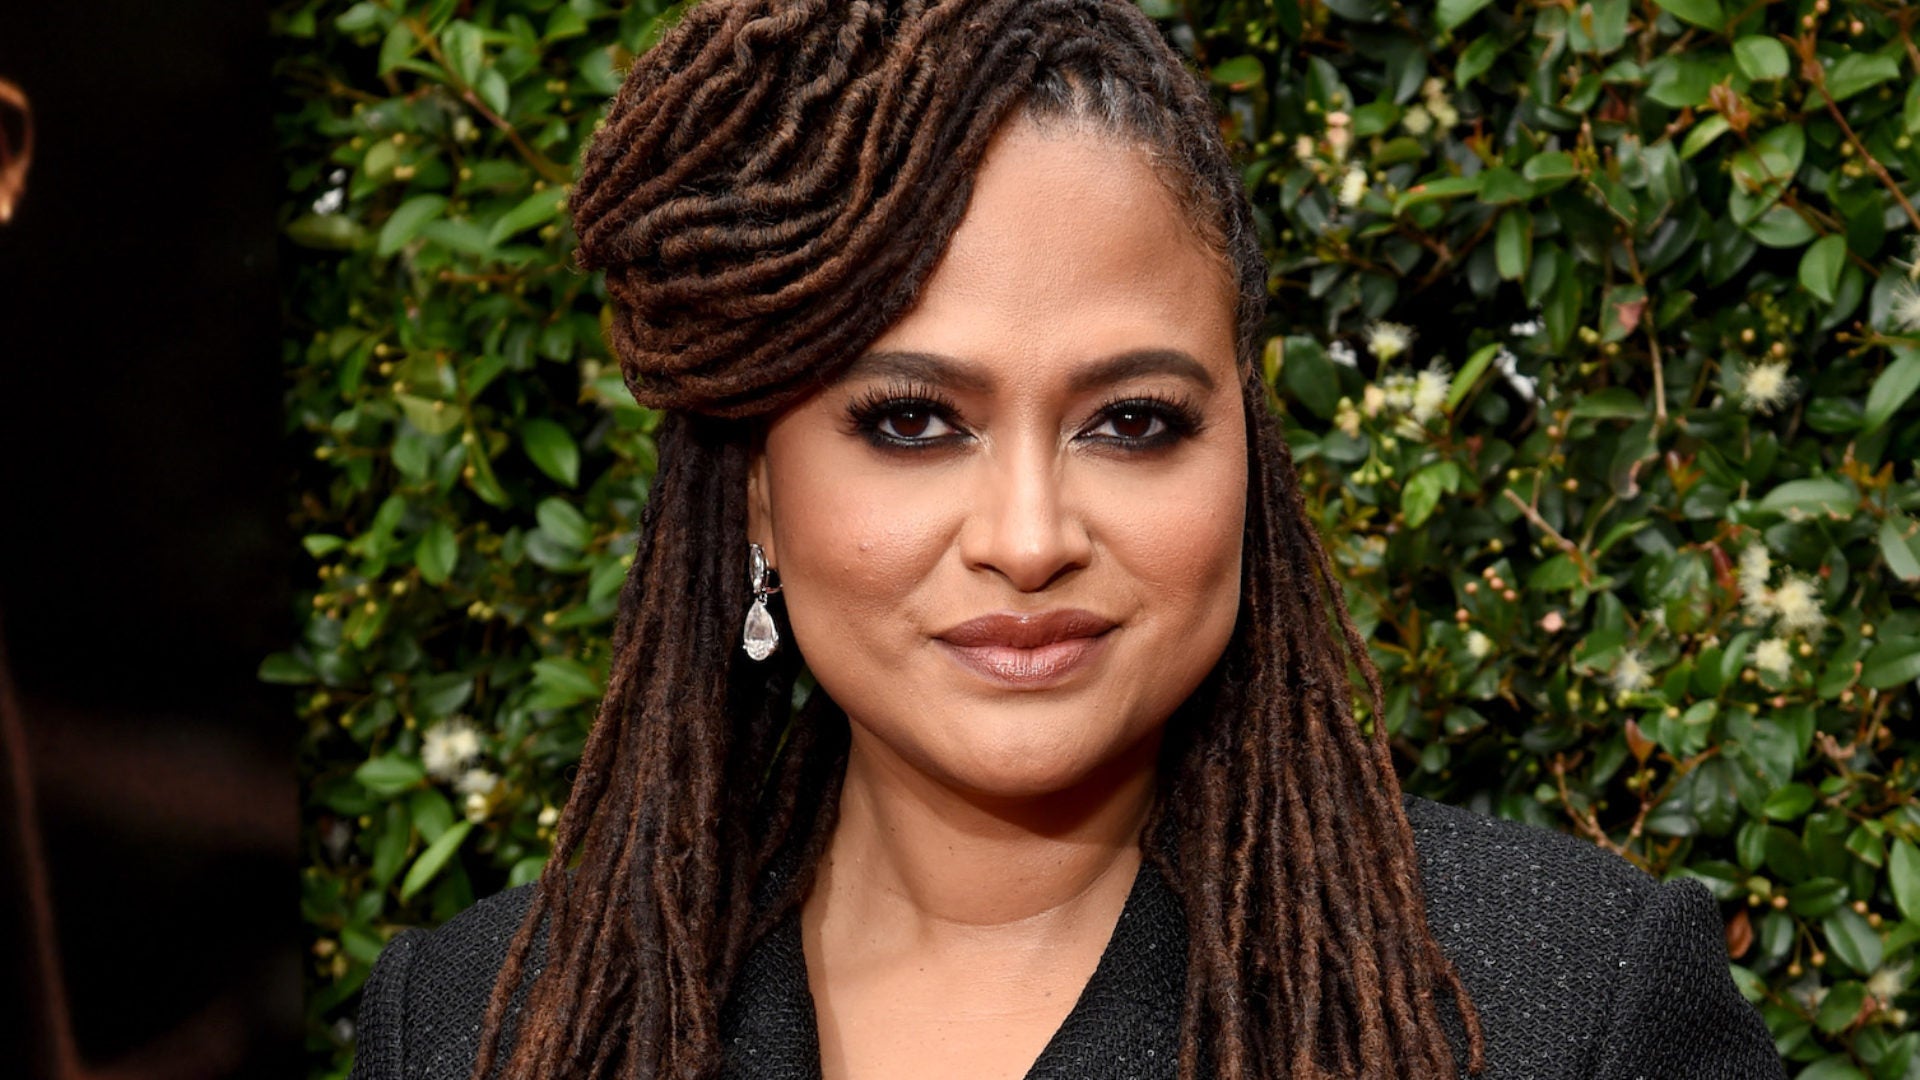 Ava DuVernay Is Not Surprised By Trump's Recent Comments On Central Park Five